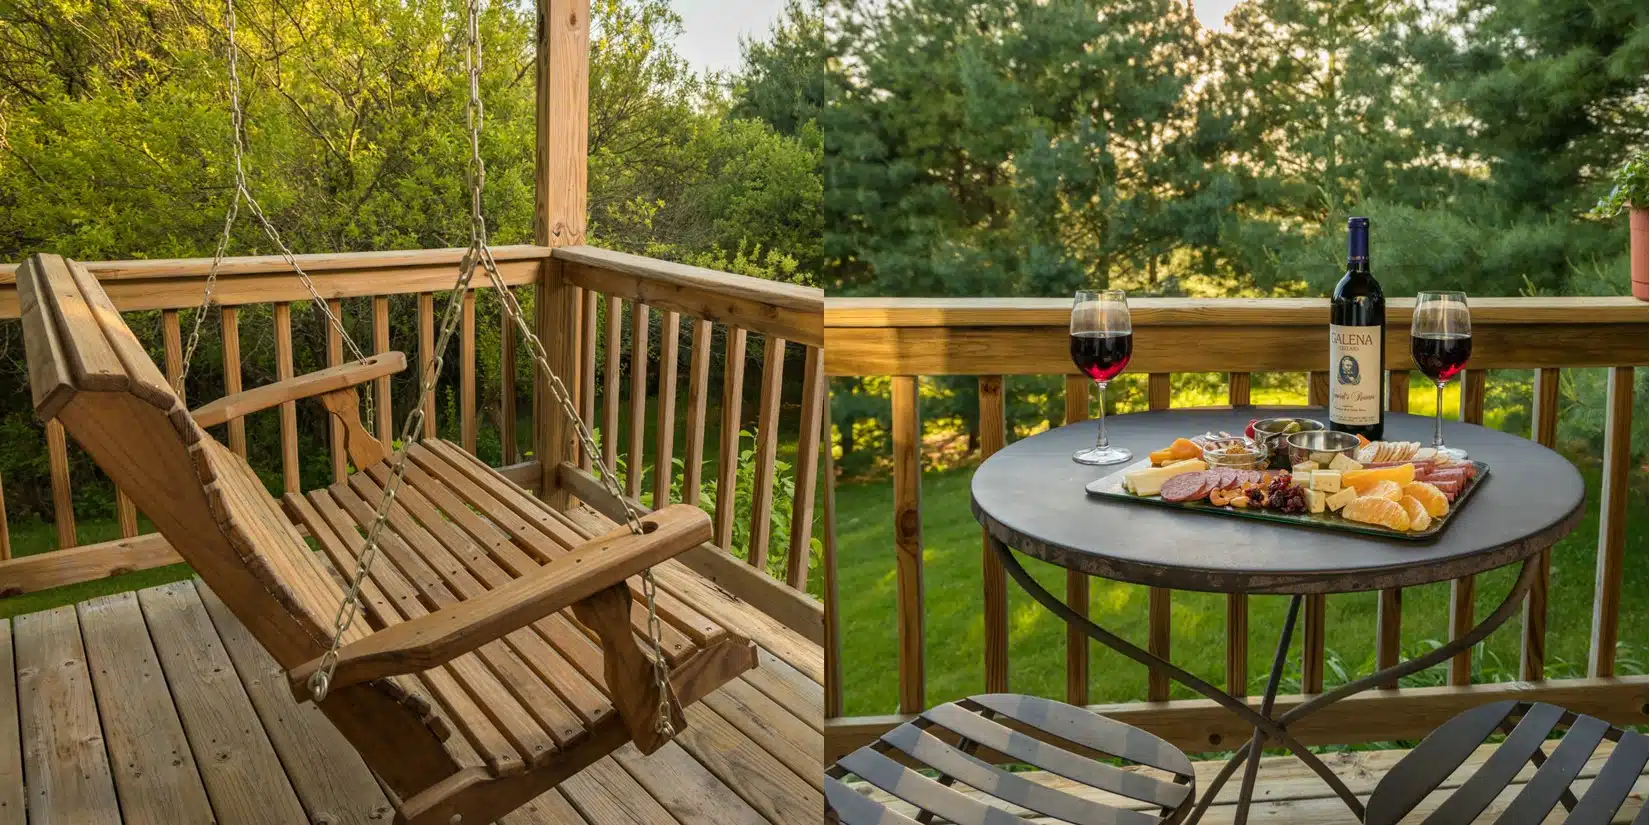 split picture showing porch spring on the left and a bistro table with wine and a charcuterie board on the right